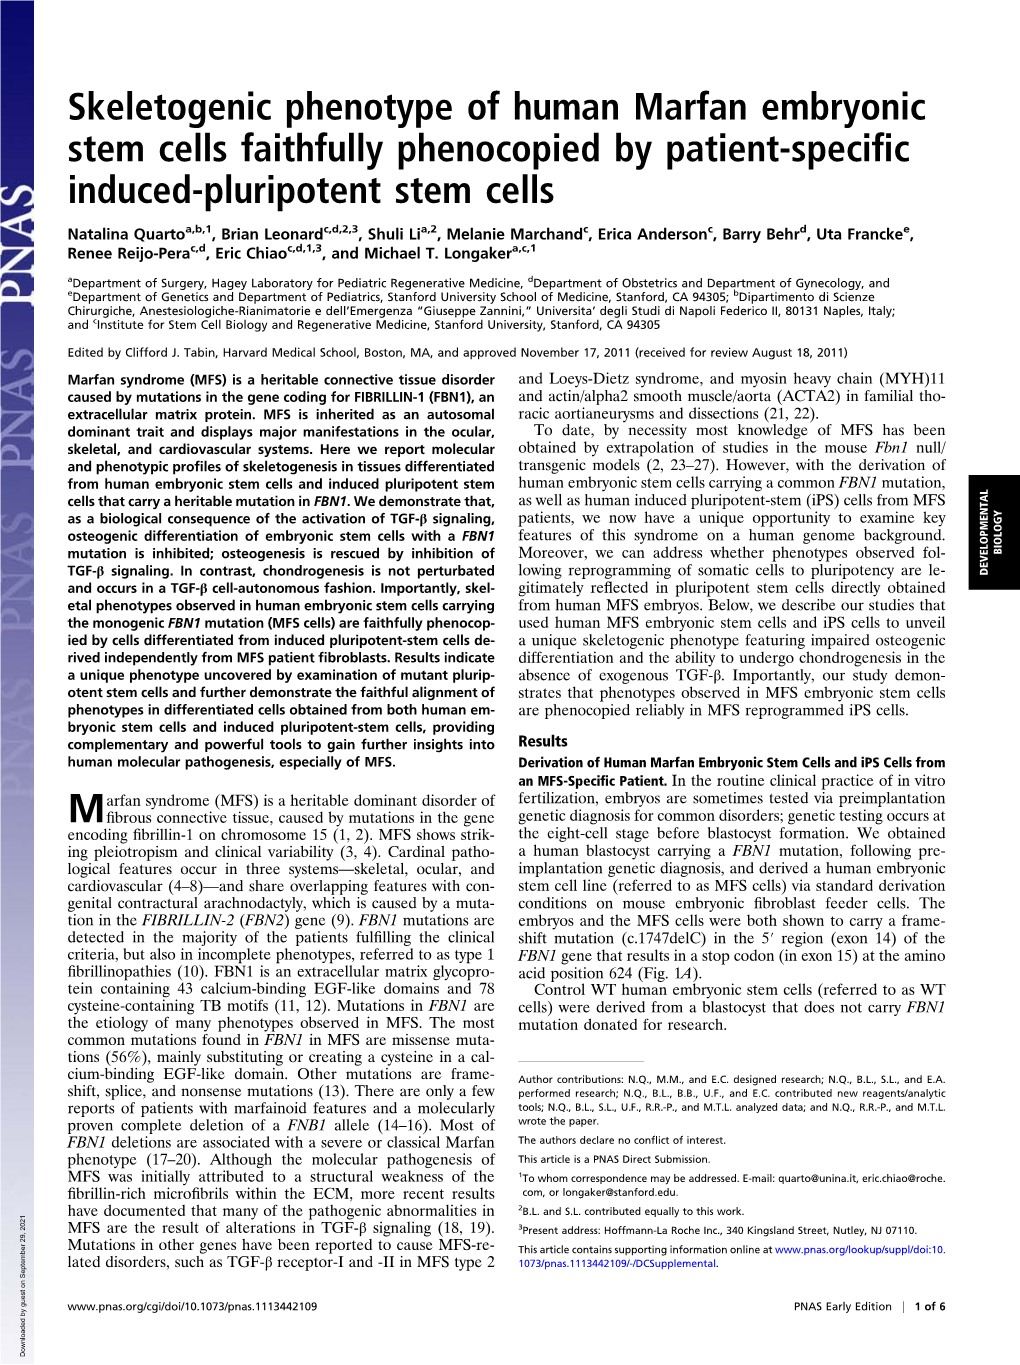 Skeletogenic Phenotype of Human Marfan Embryonic Stem Cells Faithfully Phenocopied by Patient-Speciﬁc Induced-Pluripotent Stem Cells